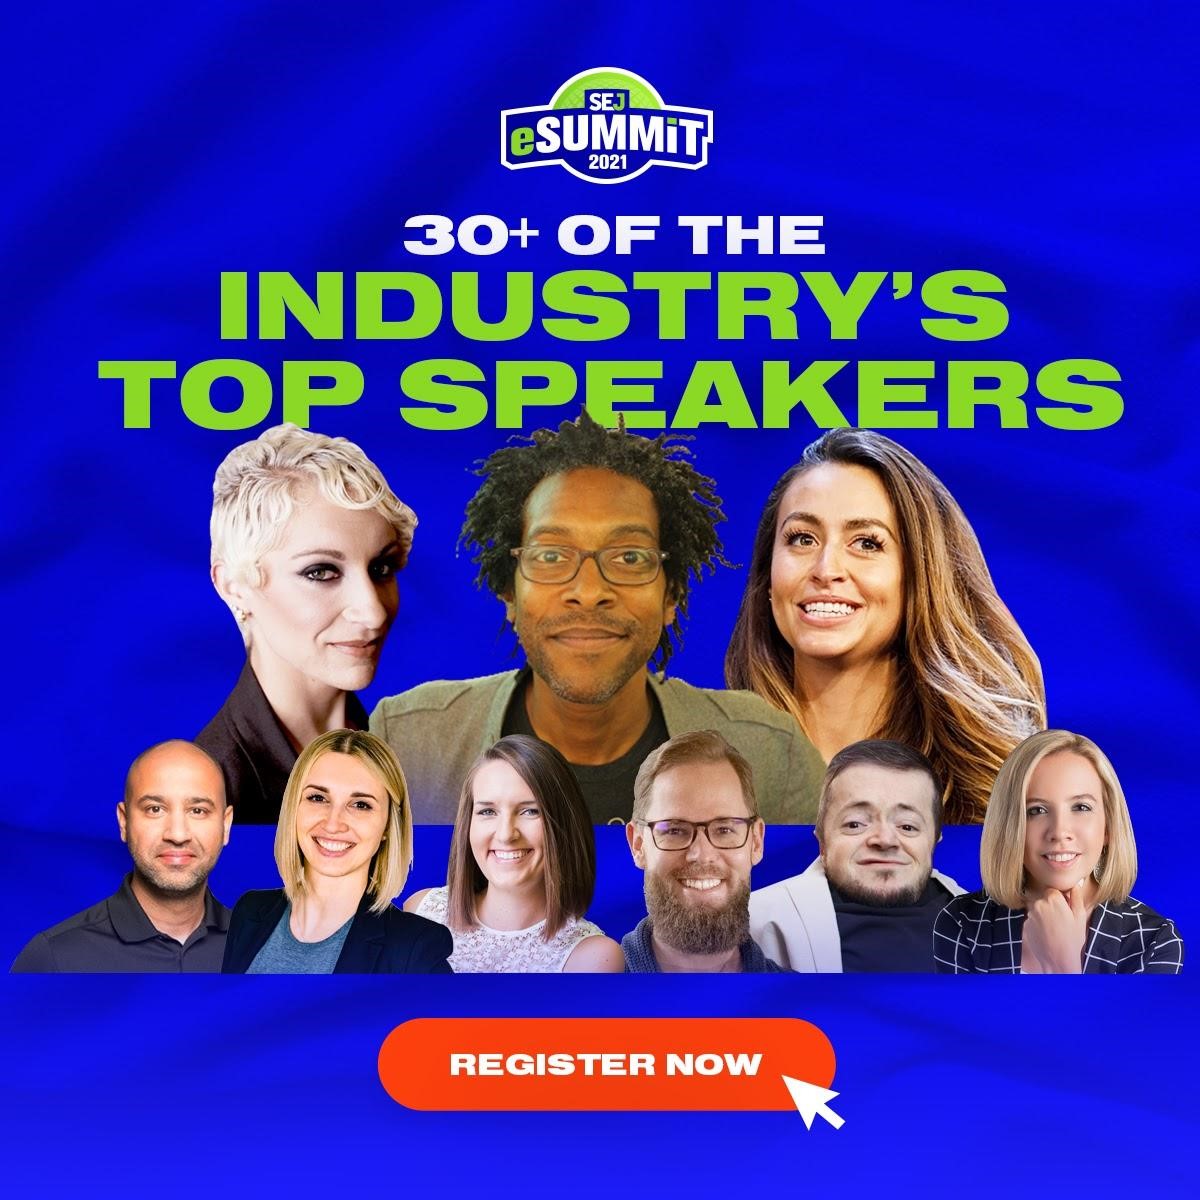 Get Ahead of SEO, PPC, Social & Content in 2021 with SEJ eSummit